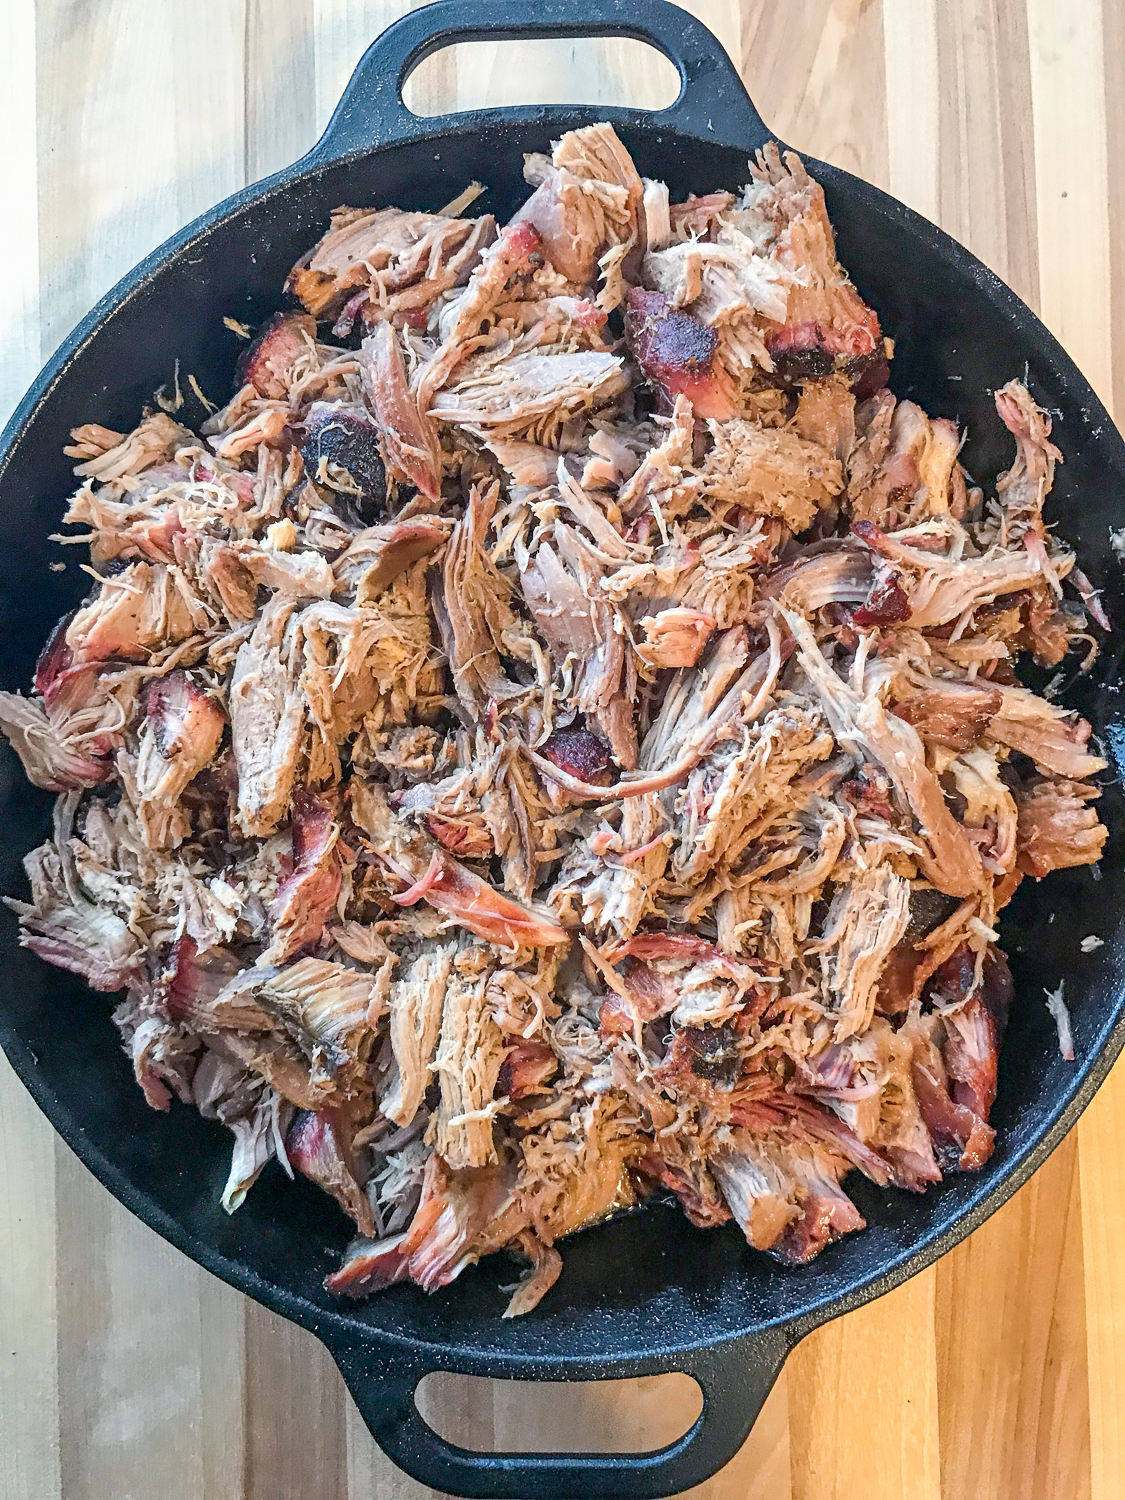 The smoked meat has been shredded for pulled pork inside a cast iron skillet. 